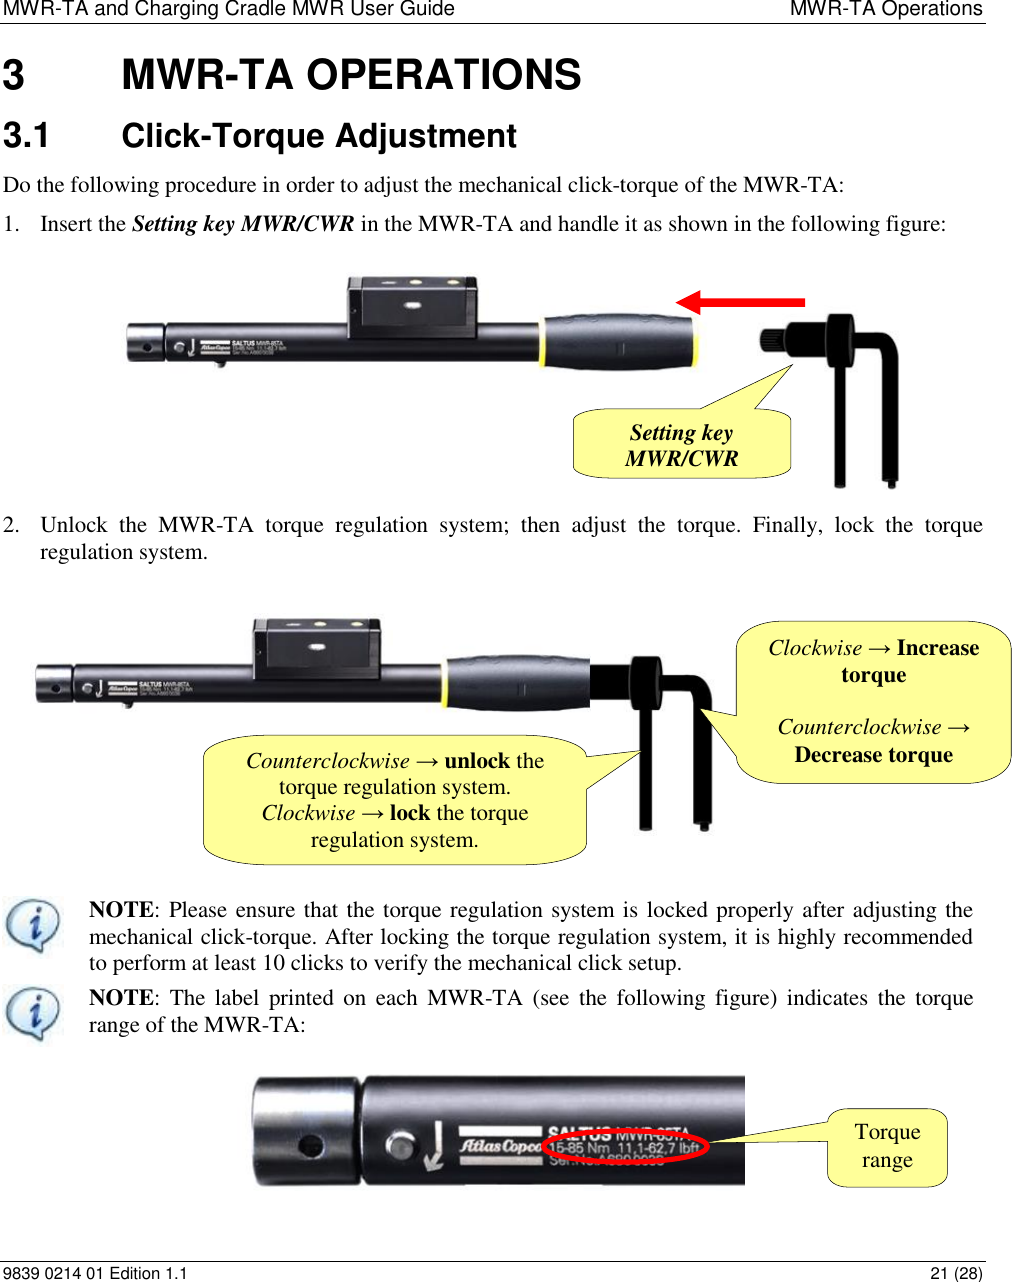 MWR-TA and Charging Cradle MWR User Guide  MWR-TA Operations 9839 0214 01 Edition 1.1  21 (28) 3  MWR-TA OPERATIONS 3.1  Click-Torque Adjustment  Do the following procedure in order to adjust the mechanical click-torque of the MWR-TA:  1. Insert the Setting key MWR/CWR in the MWR-TA and handle it as shown in the following figure:           2. Unlock  the  MWR-TA  torque  regulation  system;  then  adjust  the  torque.  Finally,  lock  the  torque regulation system.    NOTE: Please ensure that the torque regulation system is locked properly after adjusting the mechanical click-torque. After locking the torque regulation system, it is highly recommended to perform at least 10 clicks to verify the mechanical click setup.  NOTE: The label  printed on  each  MWR-TA  (see  the  following figure) indicates  the  torque range of the MWR-TA: Counterclockwise → unlock the torque regulation system. Clockwise → lock the torque regulation system.  Clockwise → Increase torque  Counterclockwise → Decrease torque Setting key MWR/CWR Torque range 